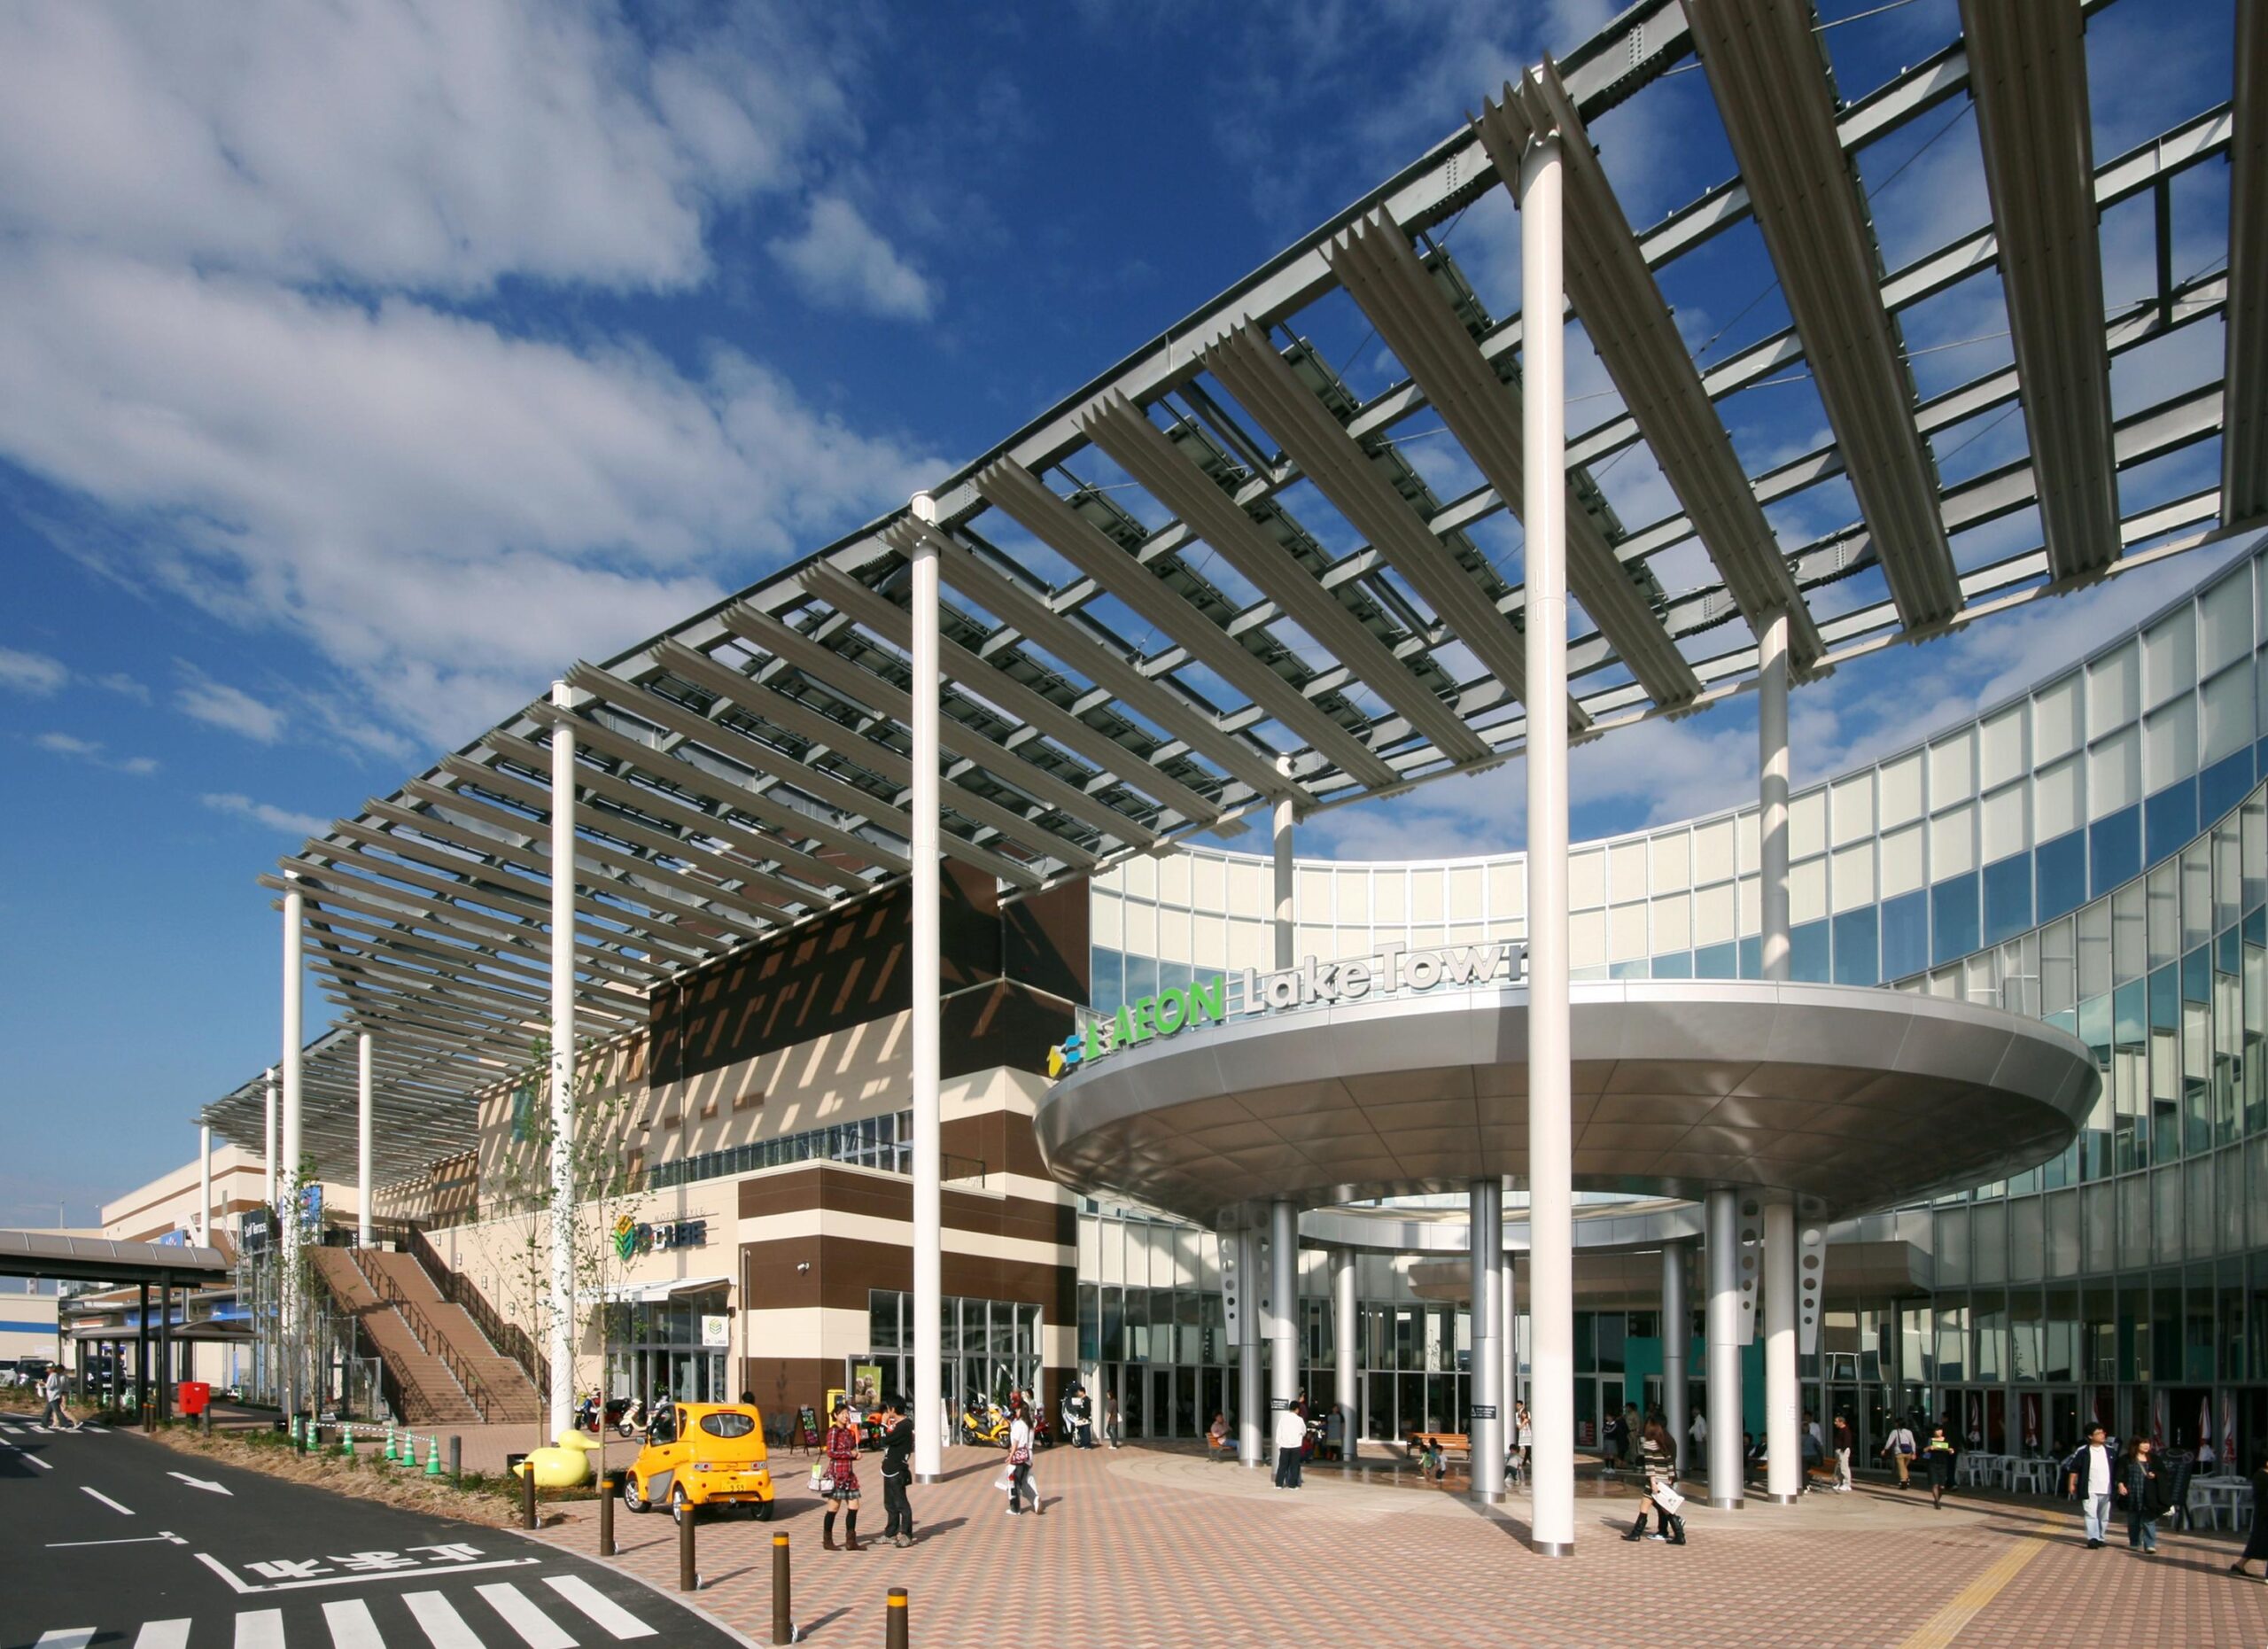  AEON LakeTown: One of Japan's Largest Shopping Malls with Outlets